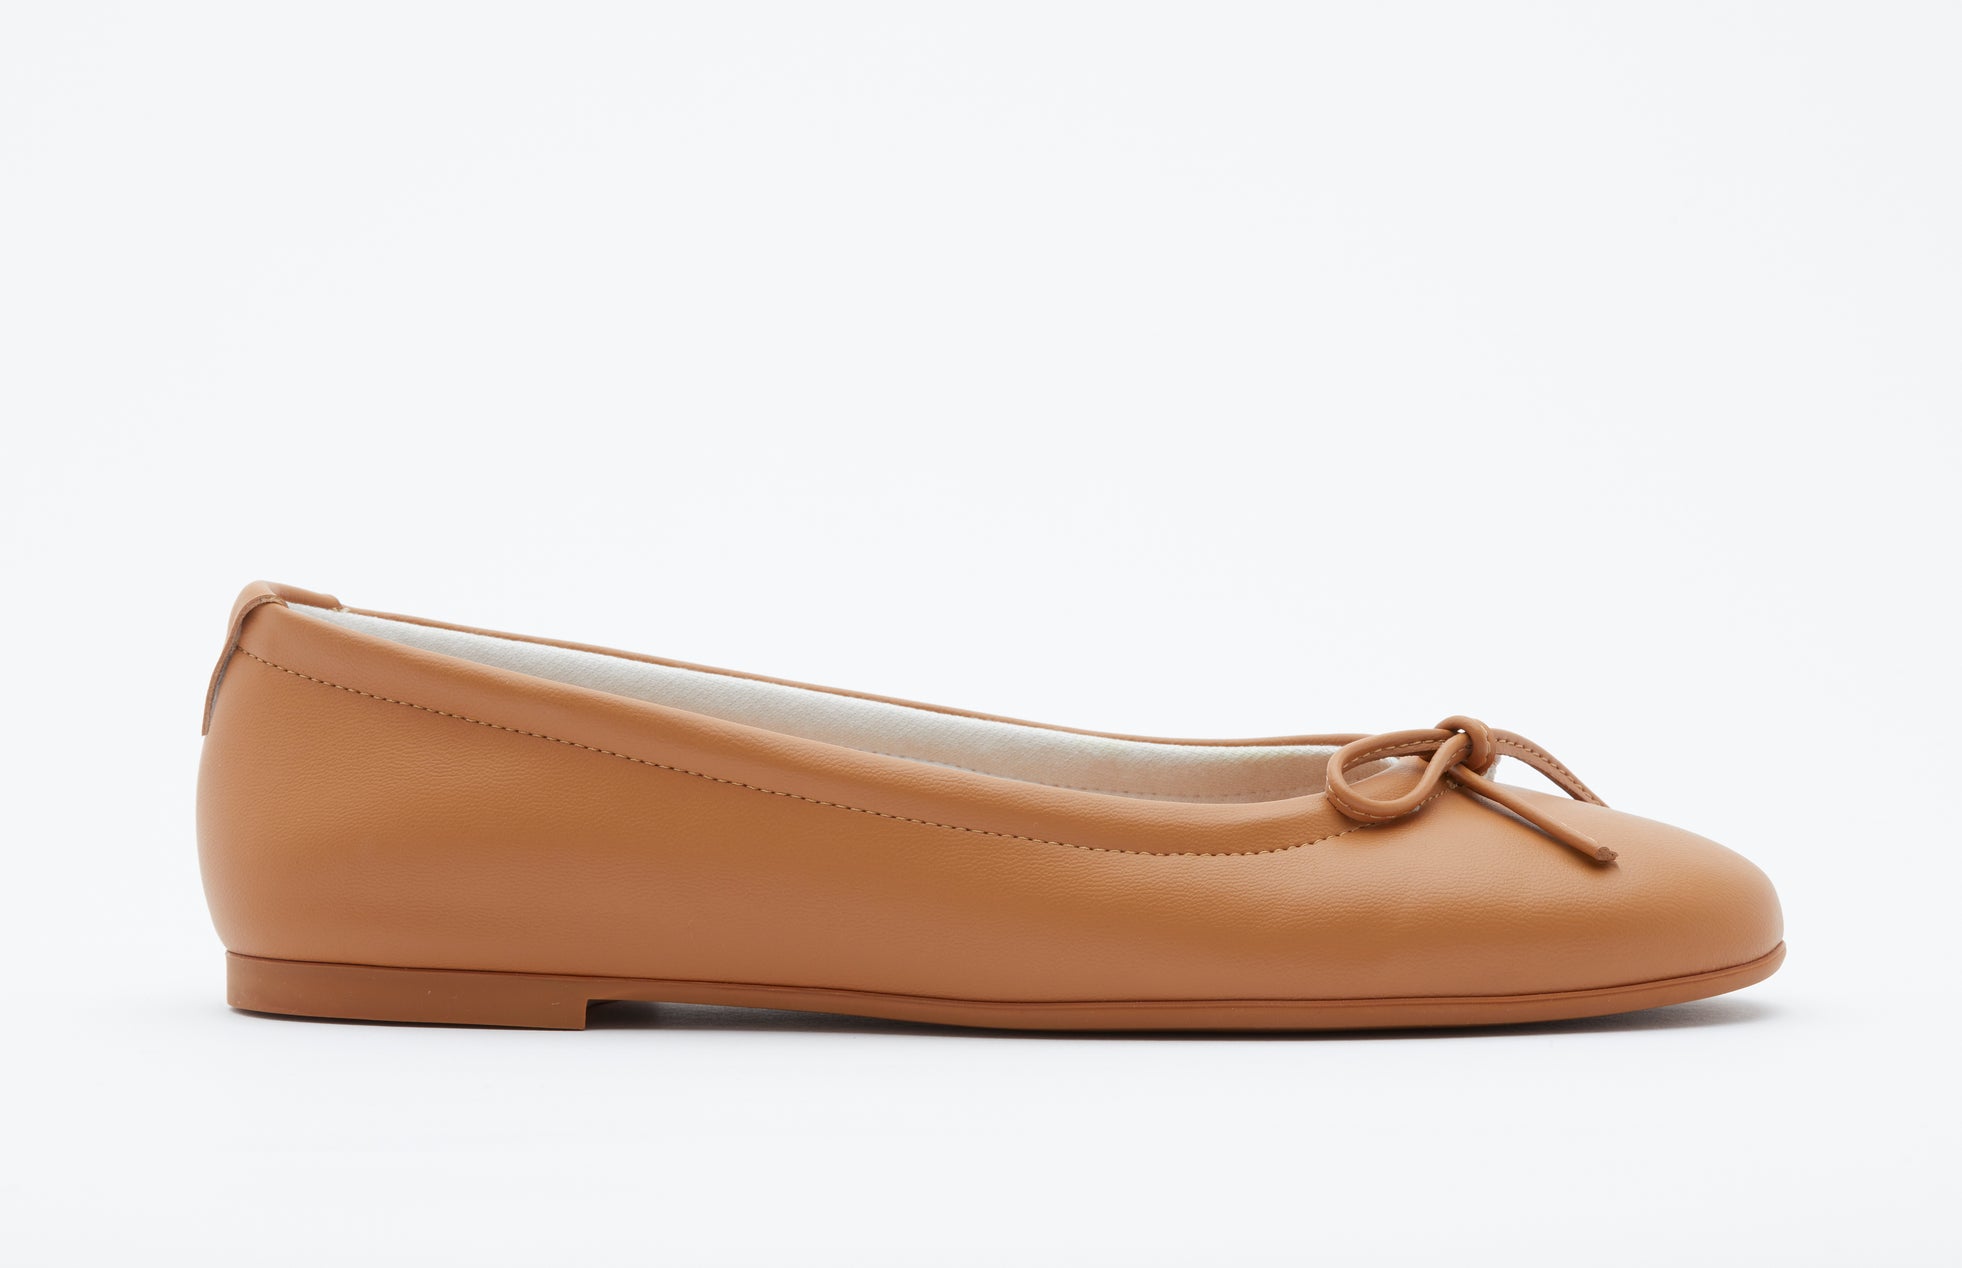 The Ballet Flat in Banbū Leather in Caramel image 8